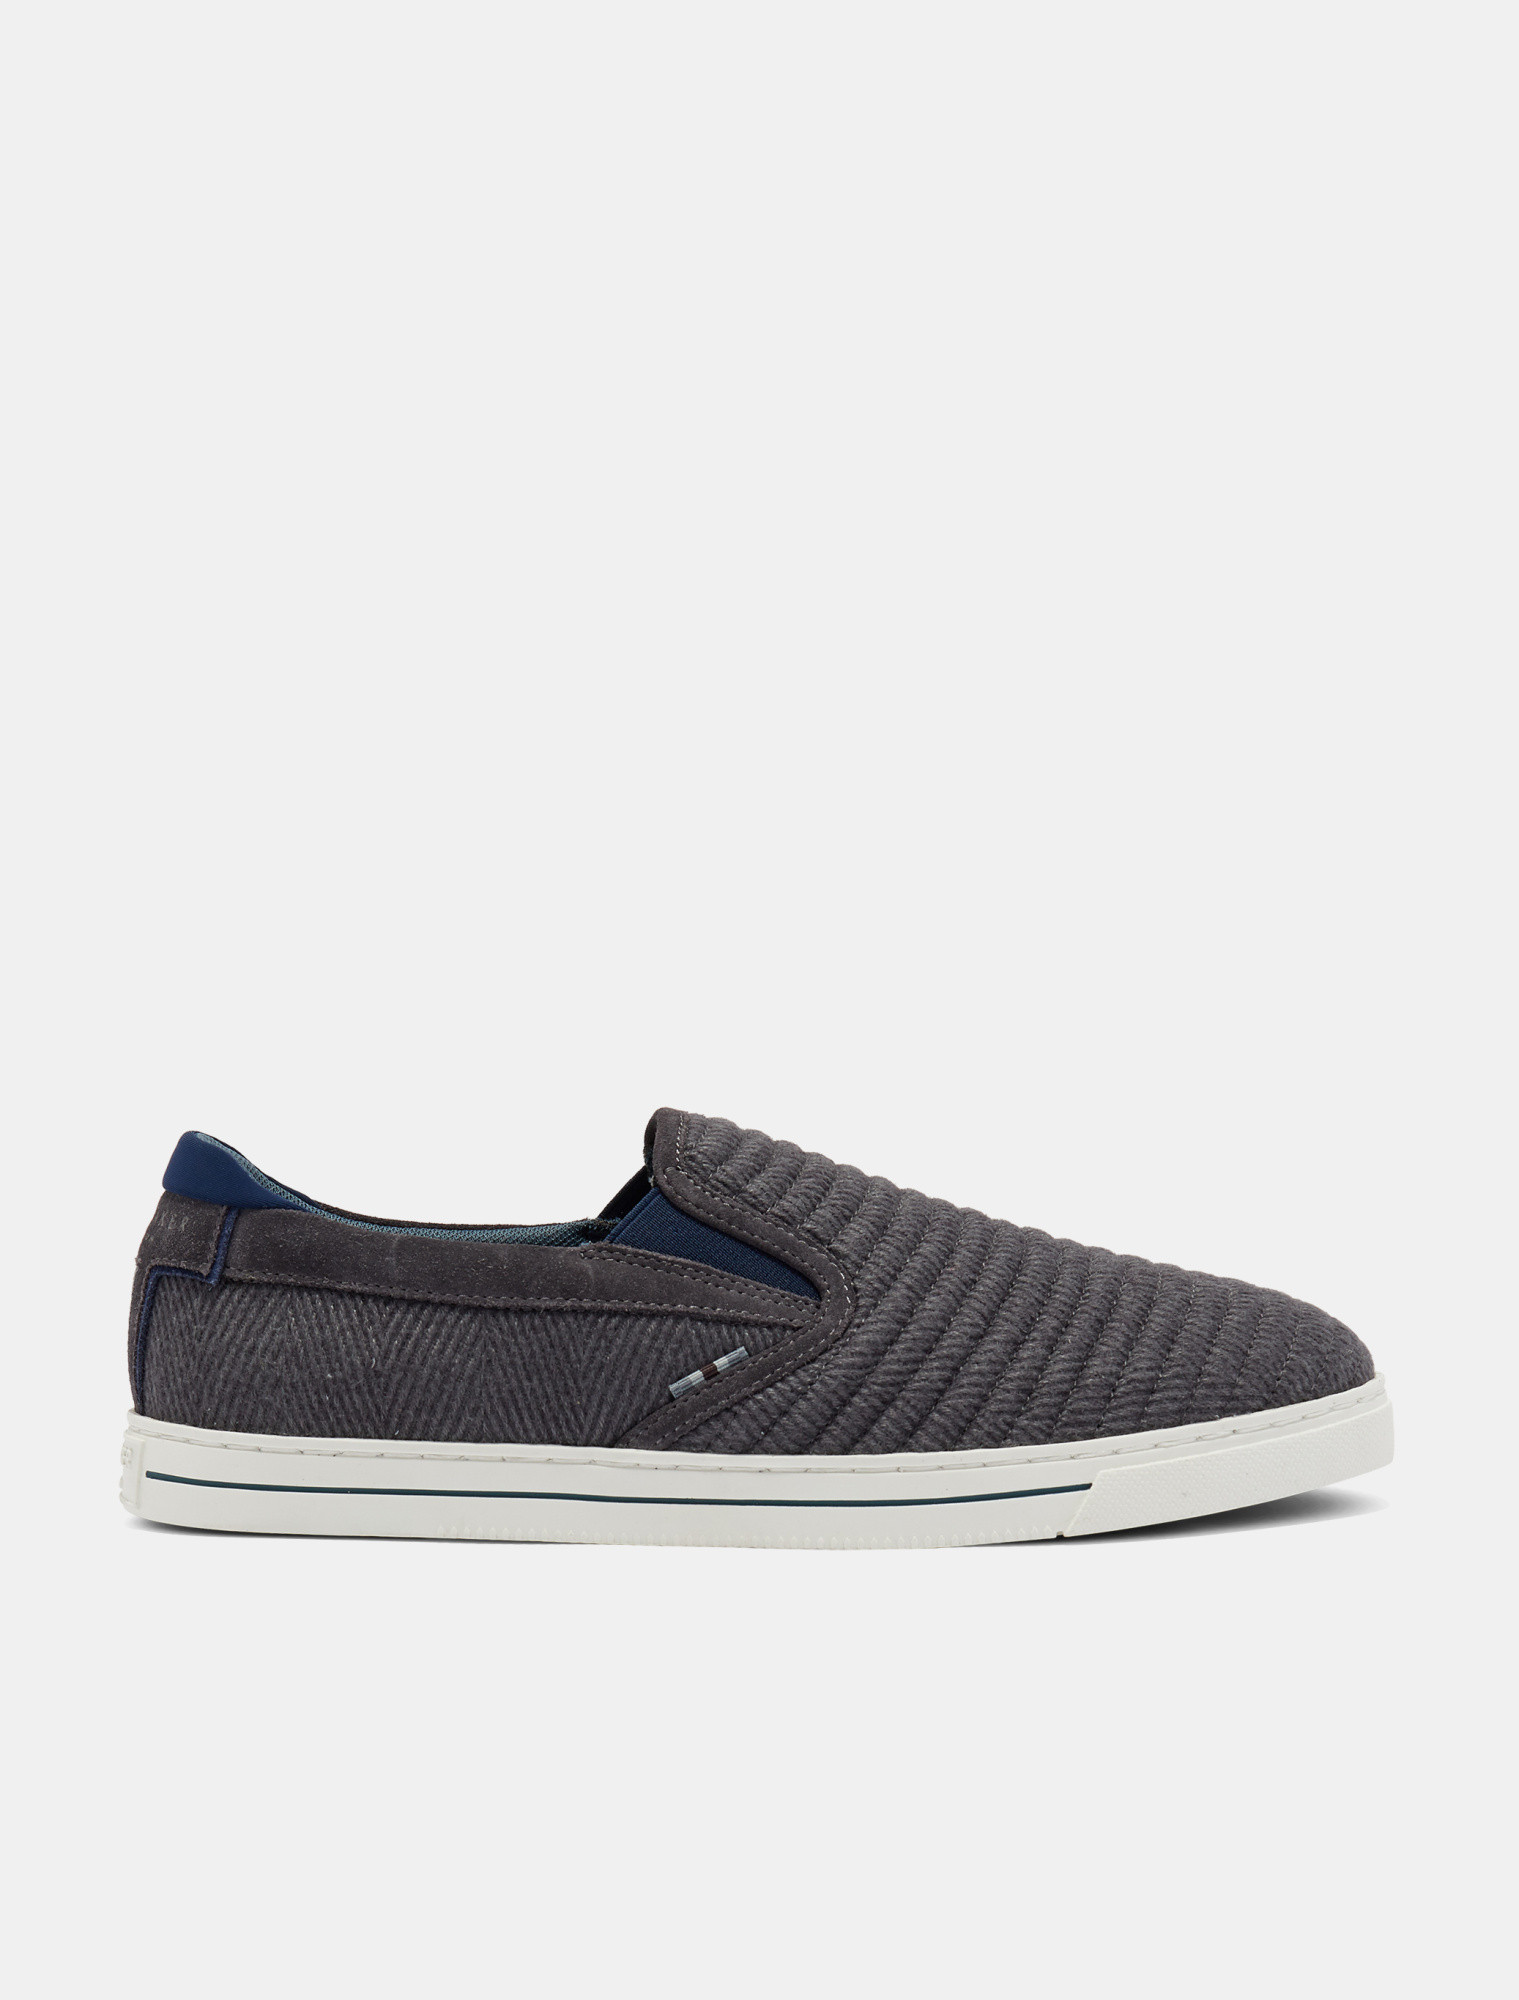 DANIAM Slip-on suede and wool trainers